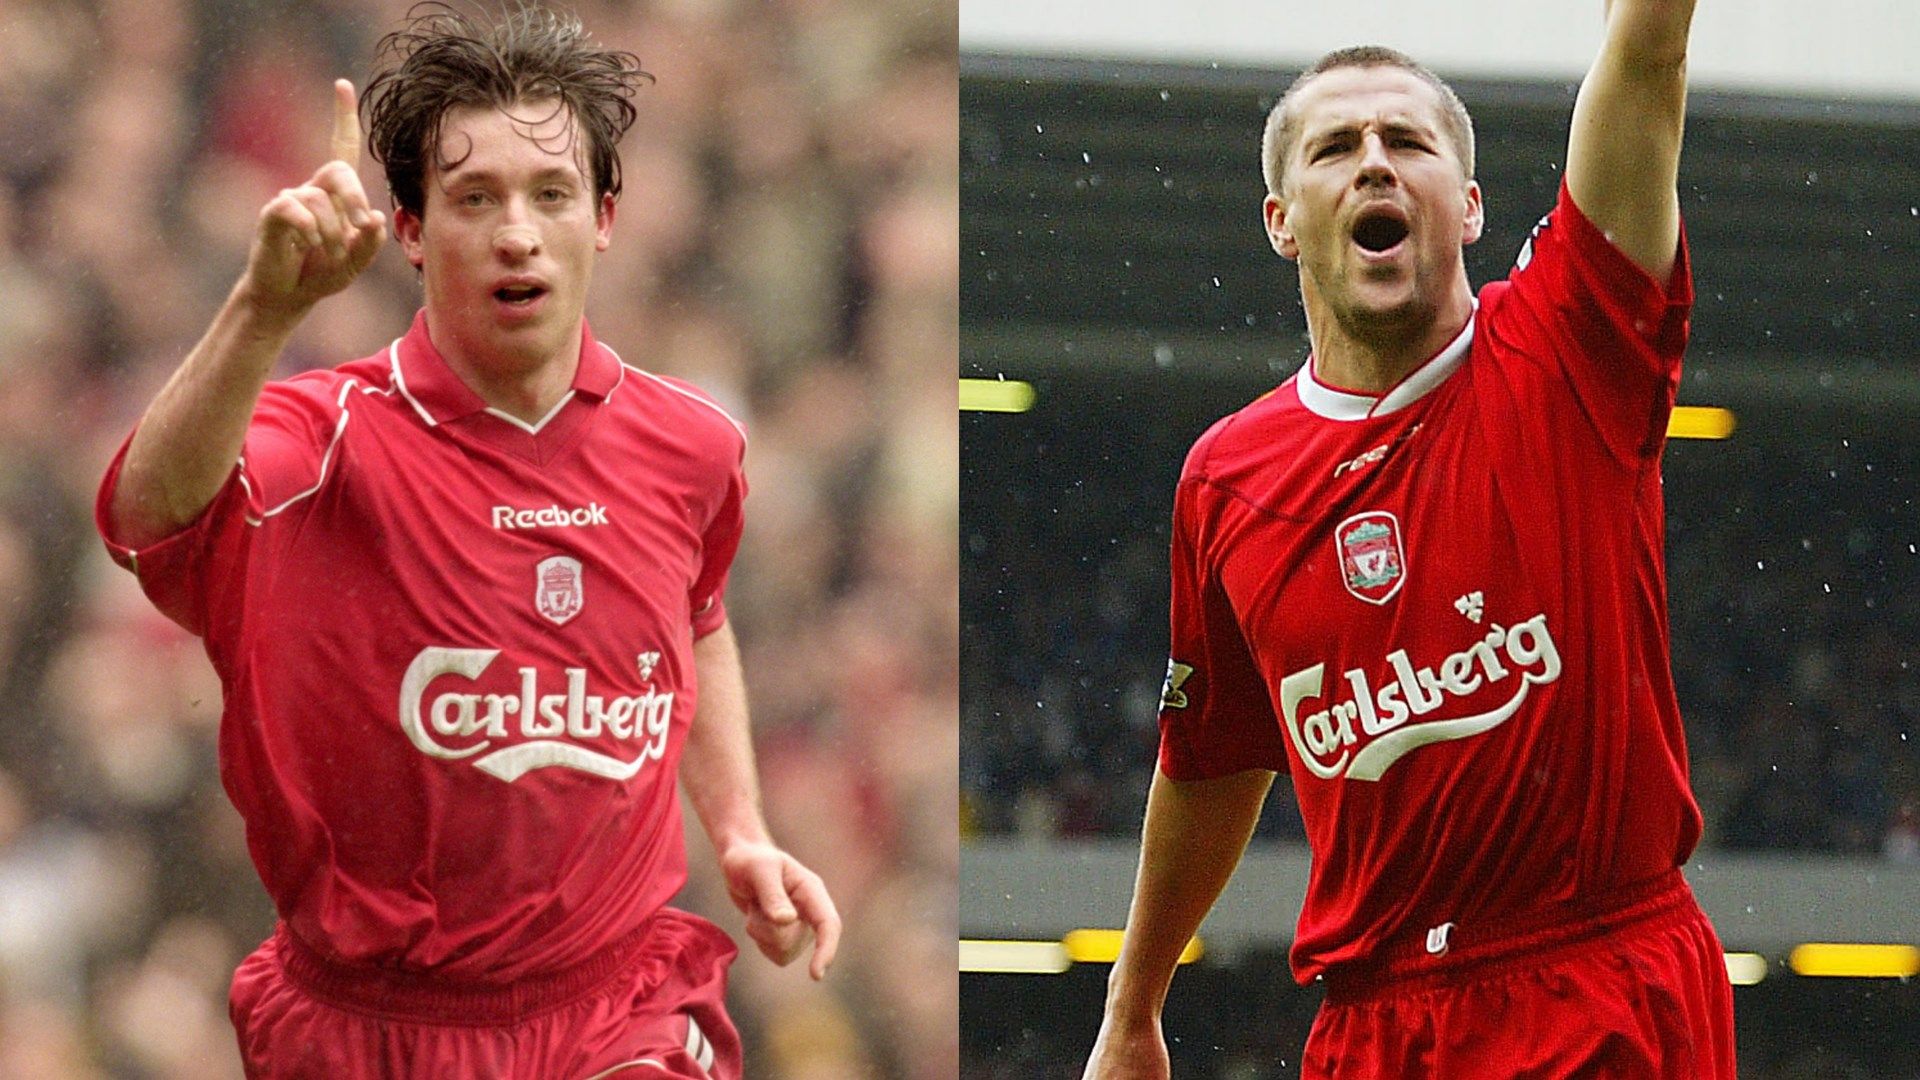 Liverpool legend Robbie Fowler claims he was better than ex-Reds